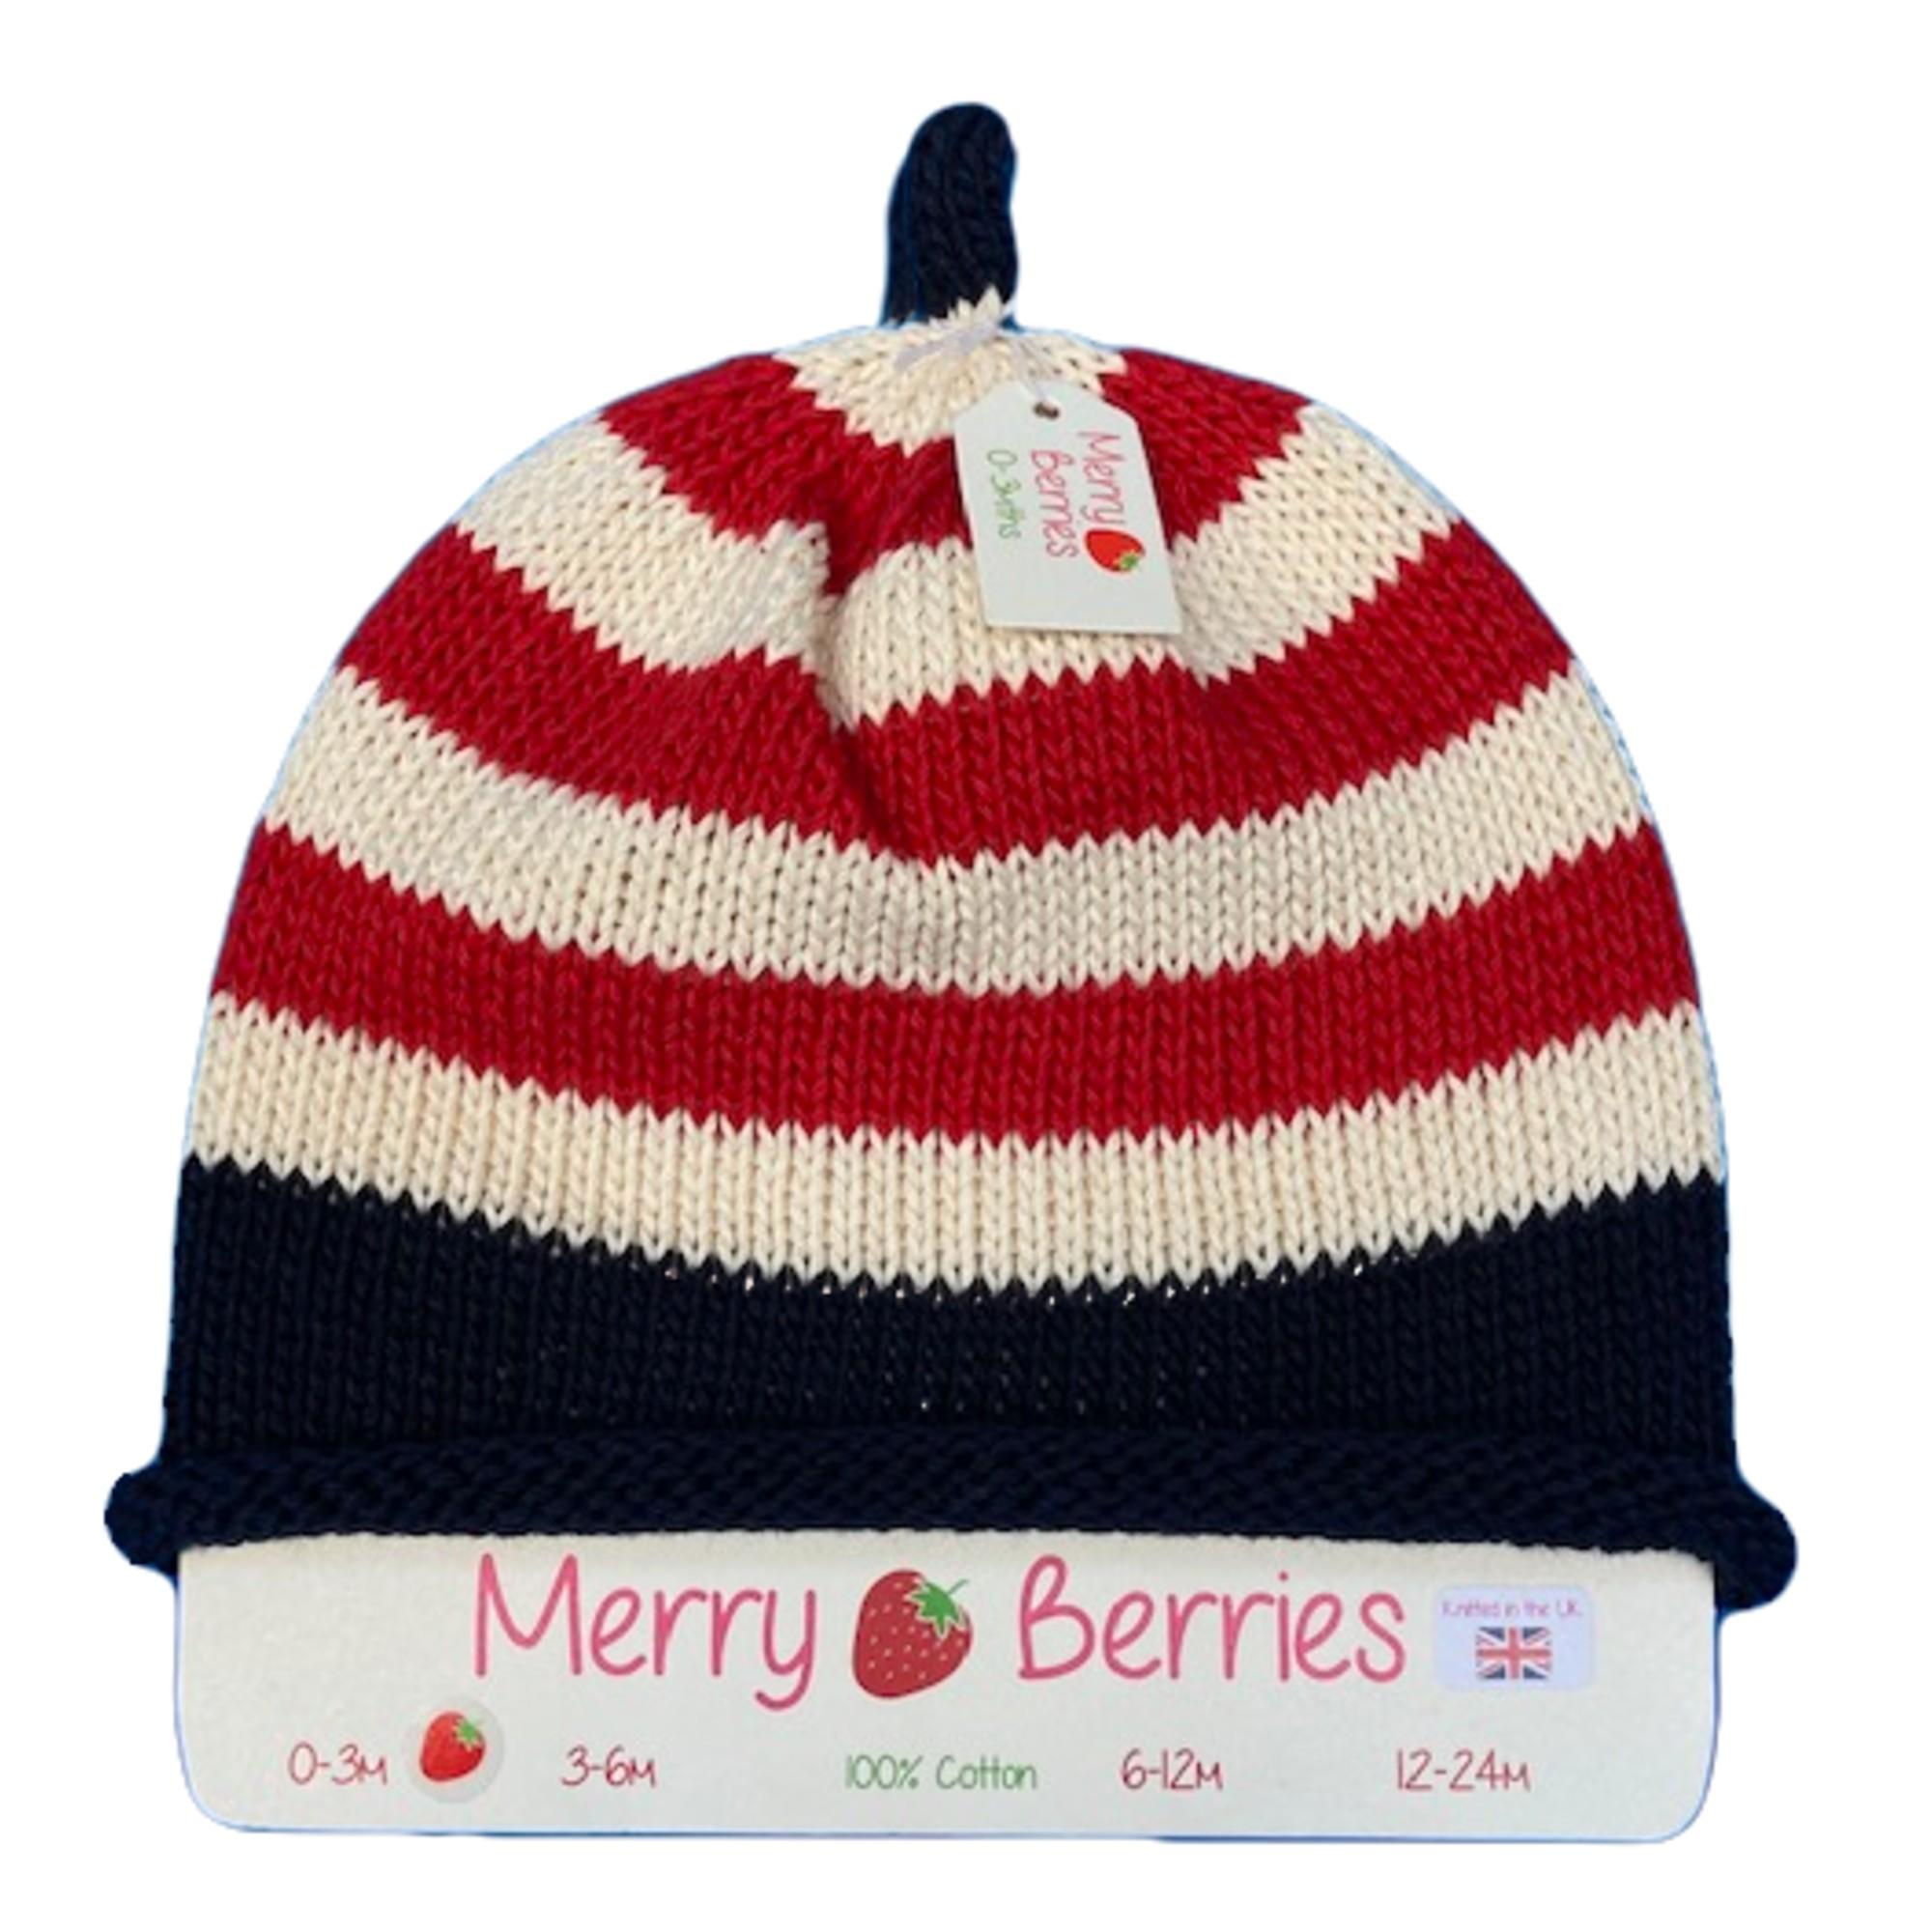 Merry Berries - Cream red navy striped Knitted baby Hat-0-24mths-Cotton